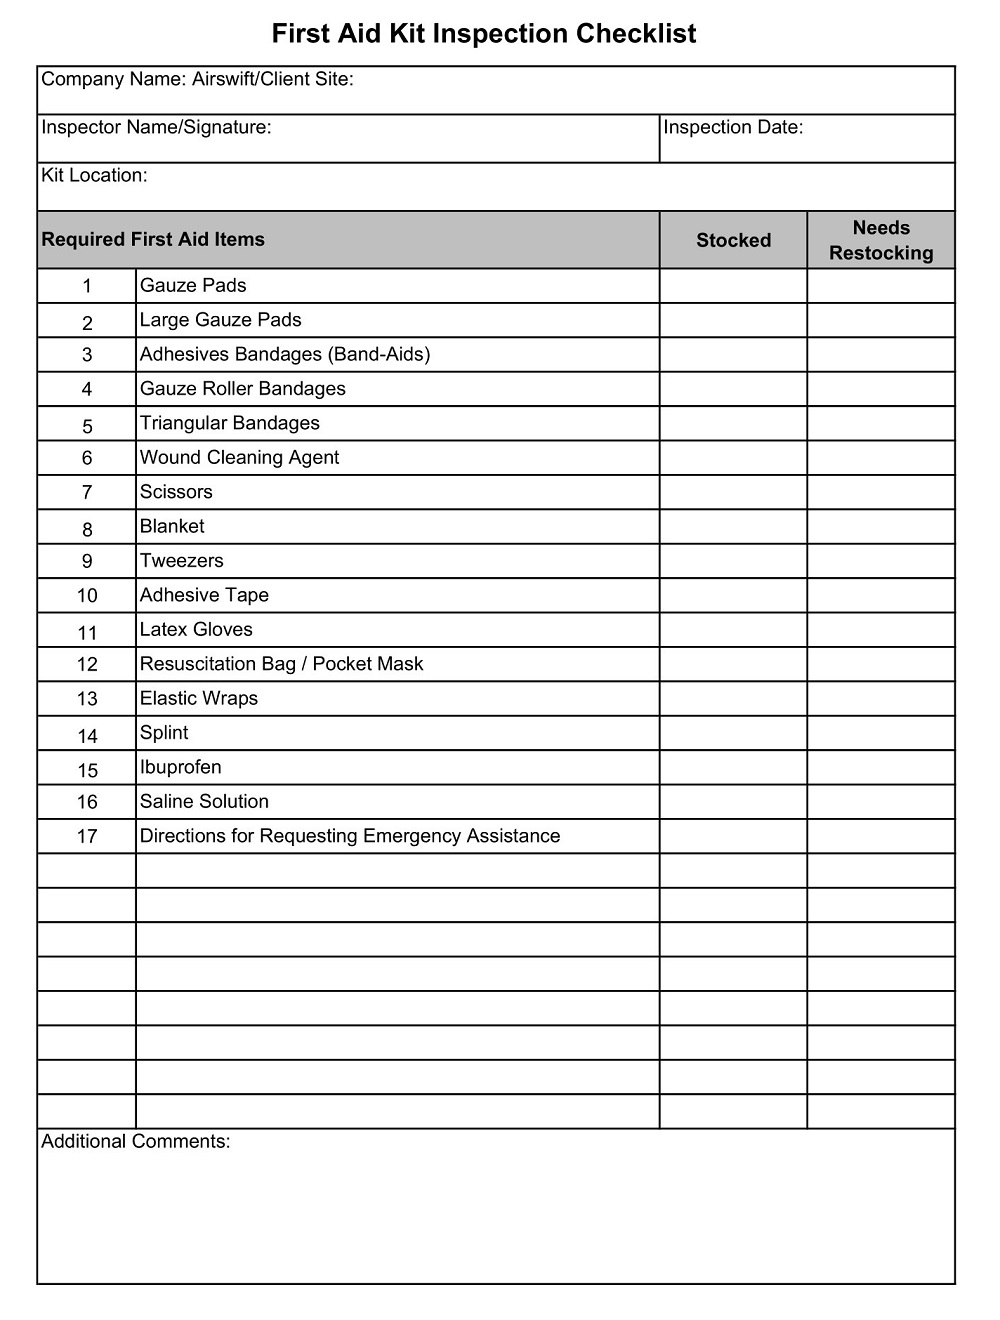 First Aid Kit Inspection Checklist PDF